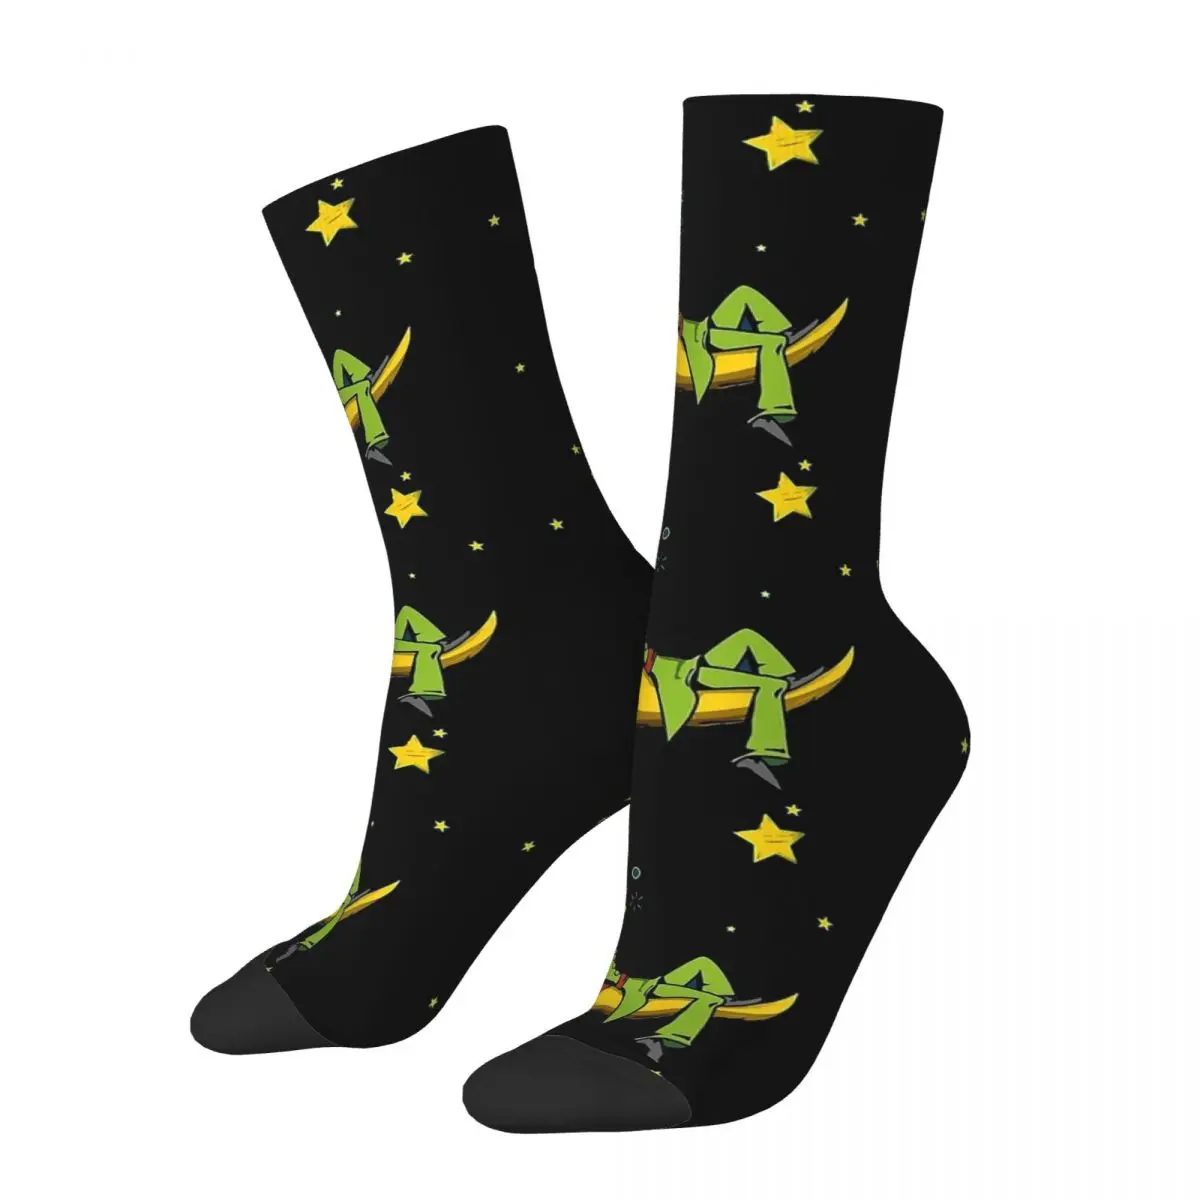 

Hip Hop Retro Sleep On The Moon Crazy Men's compression Socks Unisex The Little Prince About Life and Human Nature Crew Sock